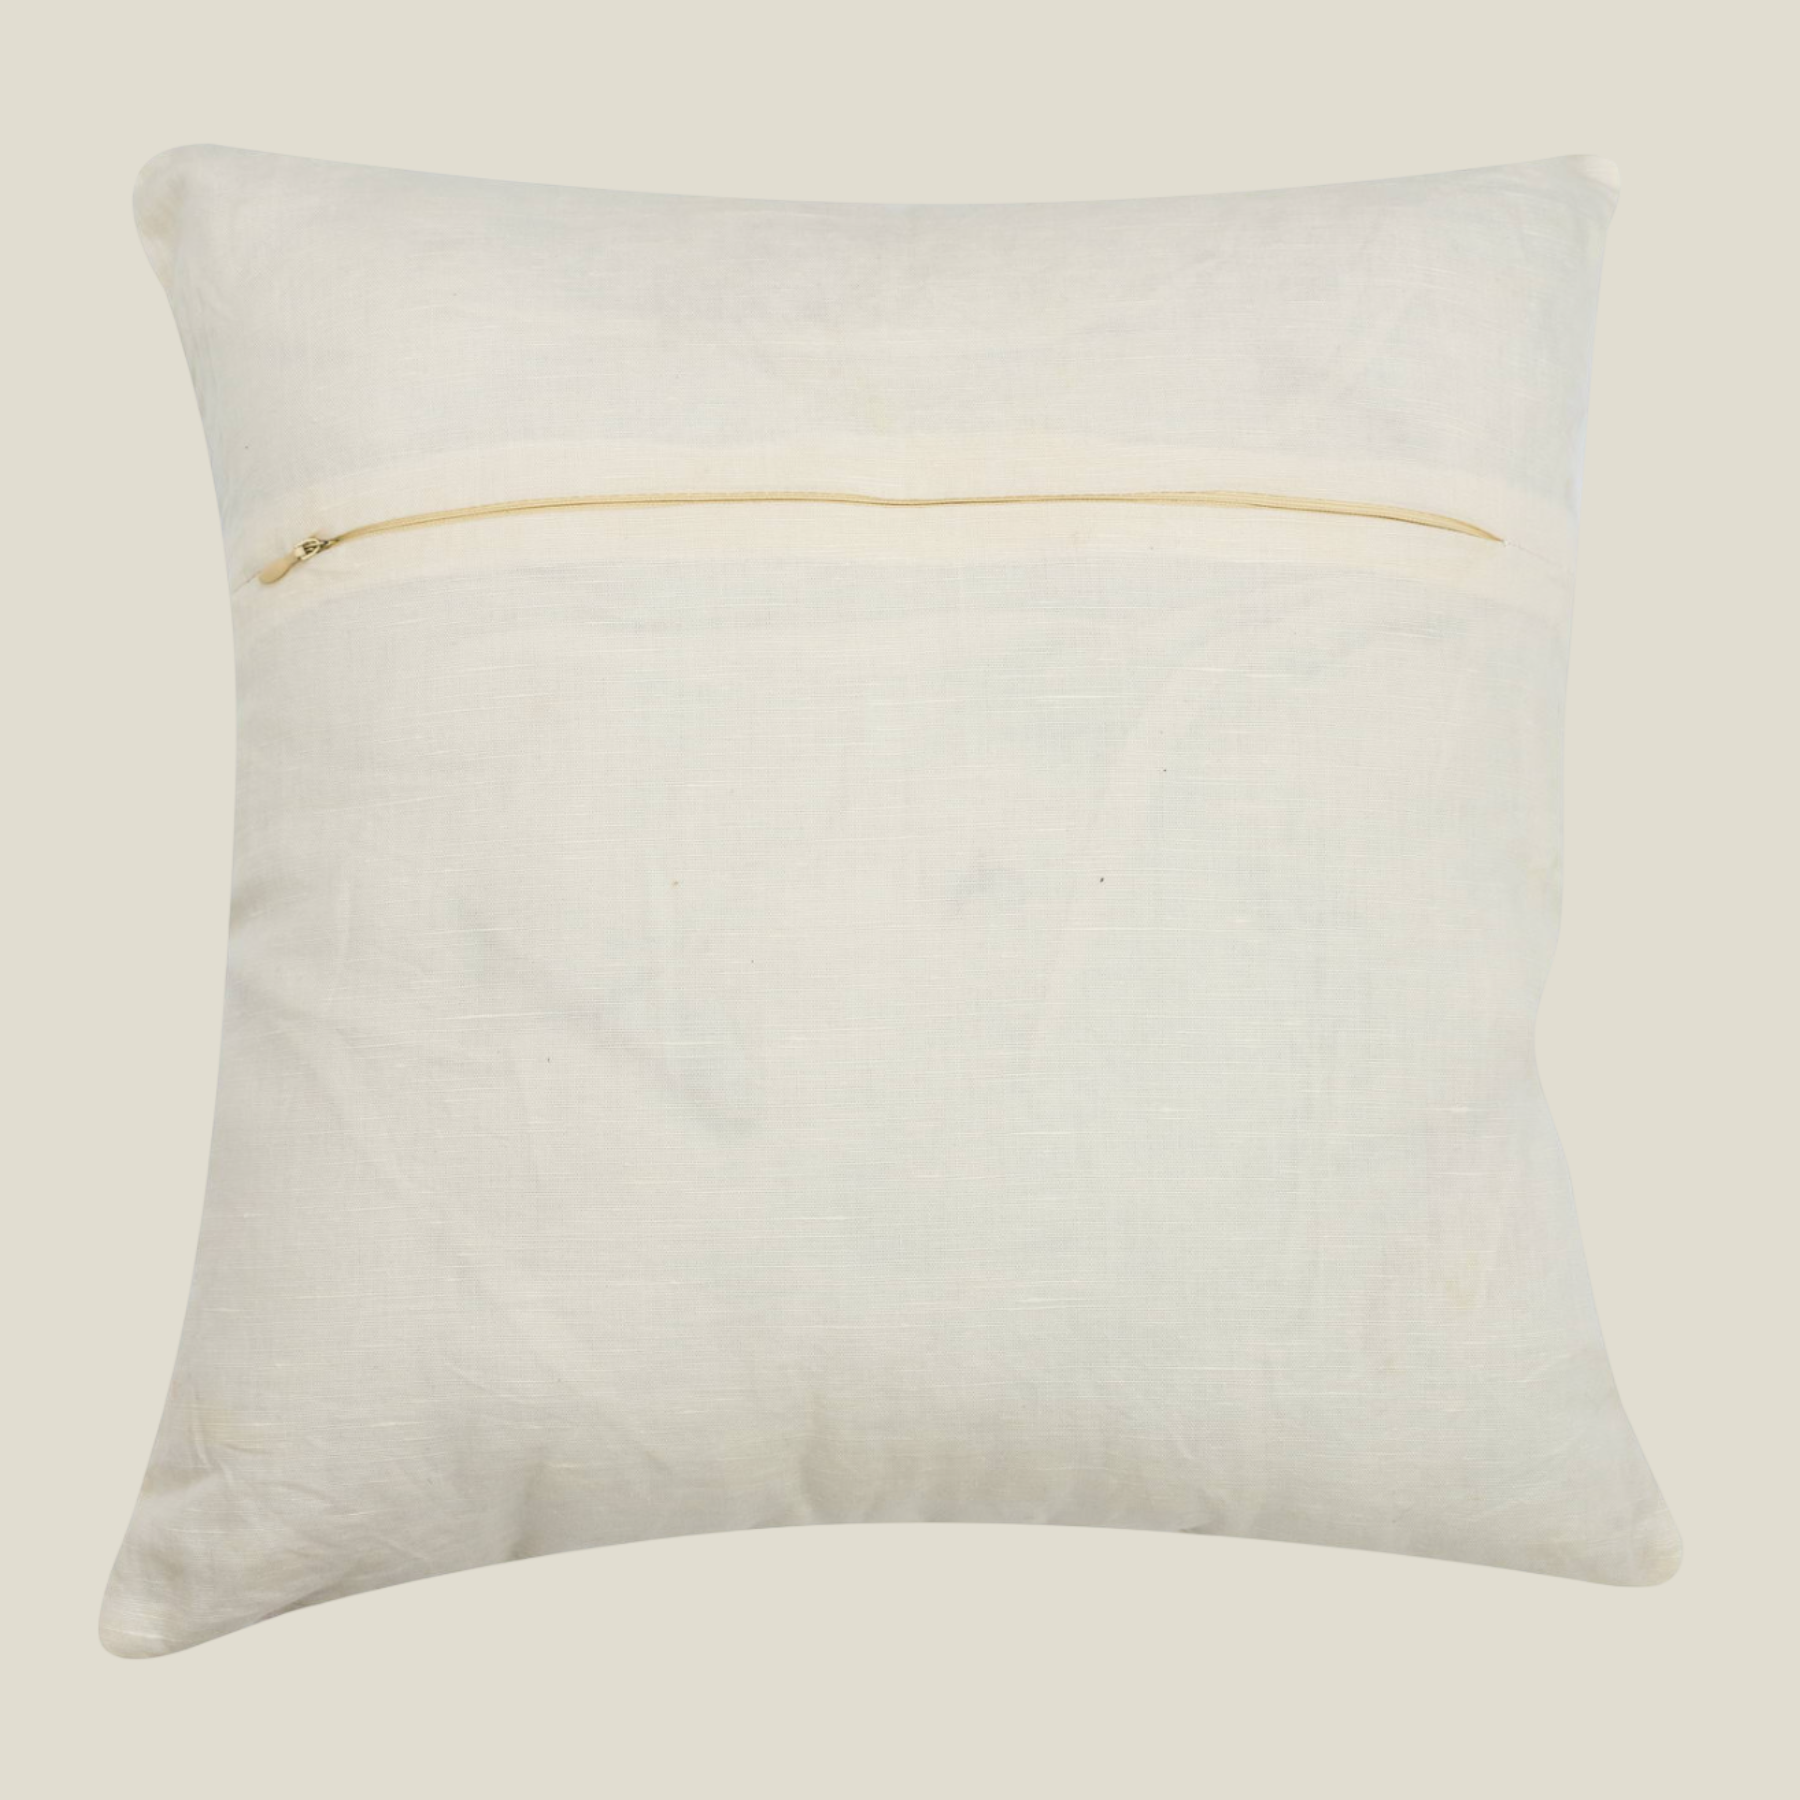 The Luxelife Off-White Cotton Floral Brown & Yellow Embroidered Cushion Cover